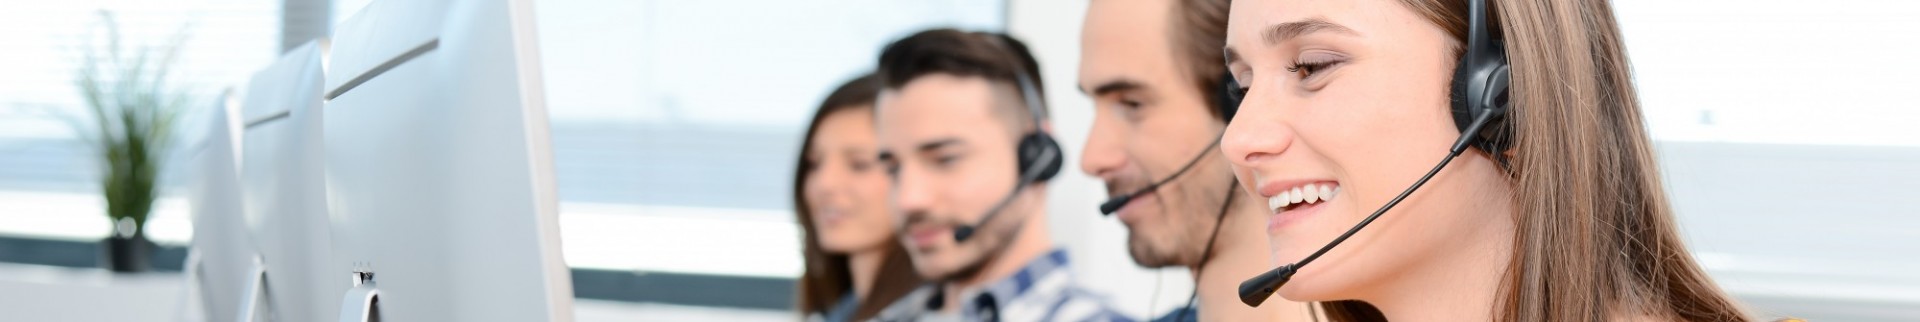 Landing page hero image of call center staff responding to customers. 